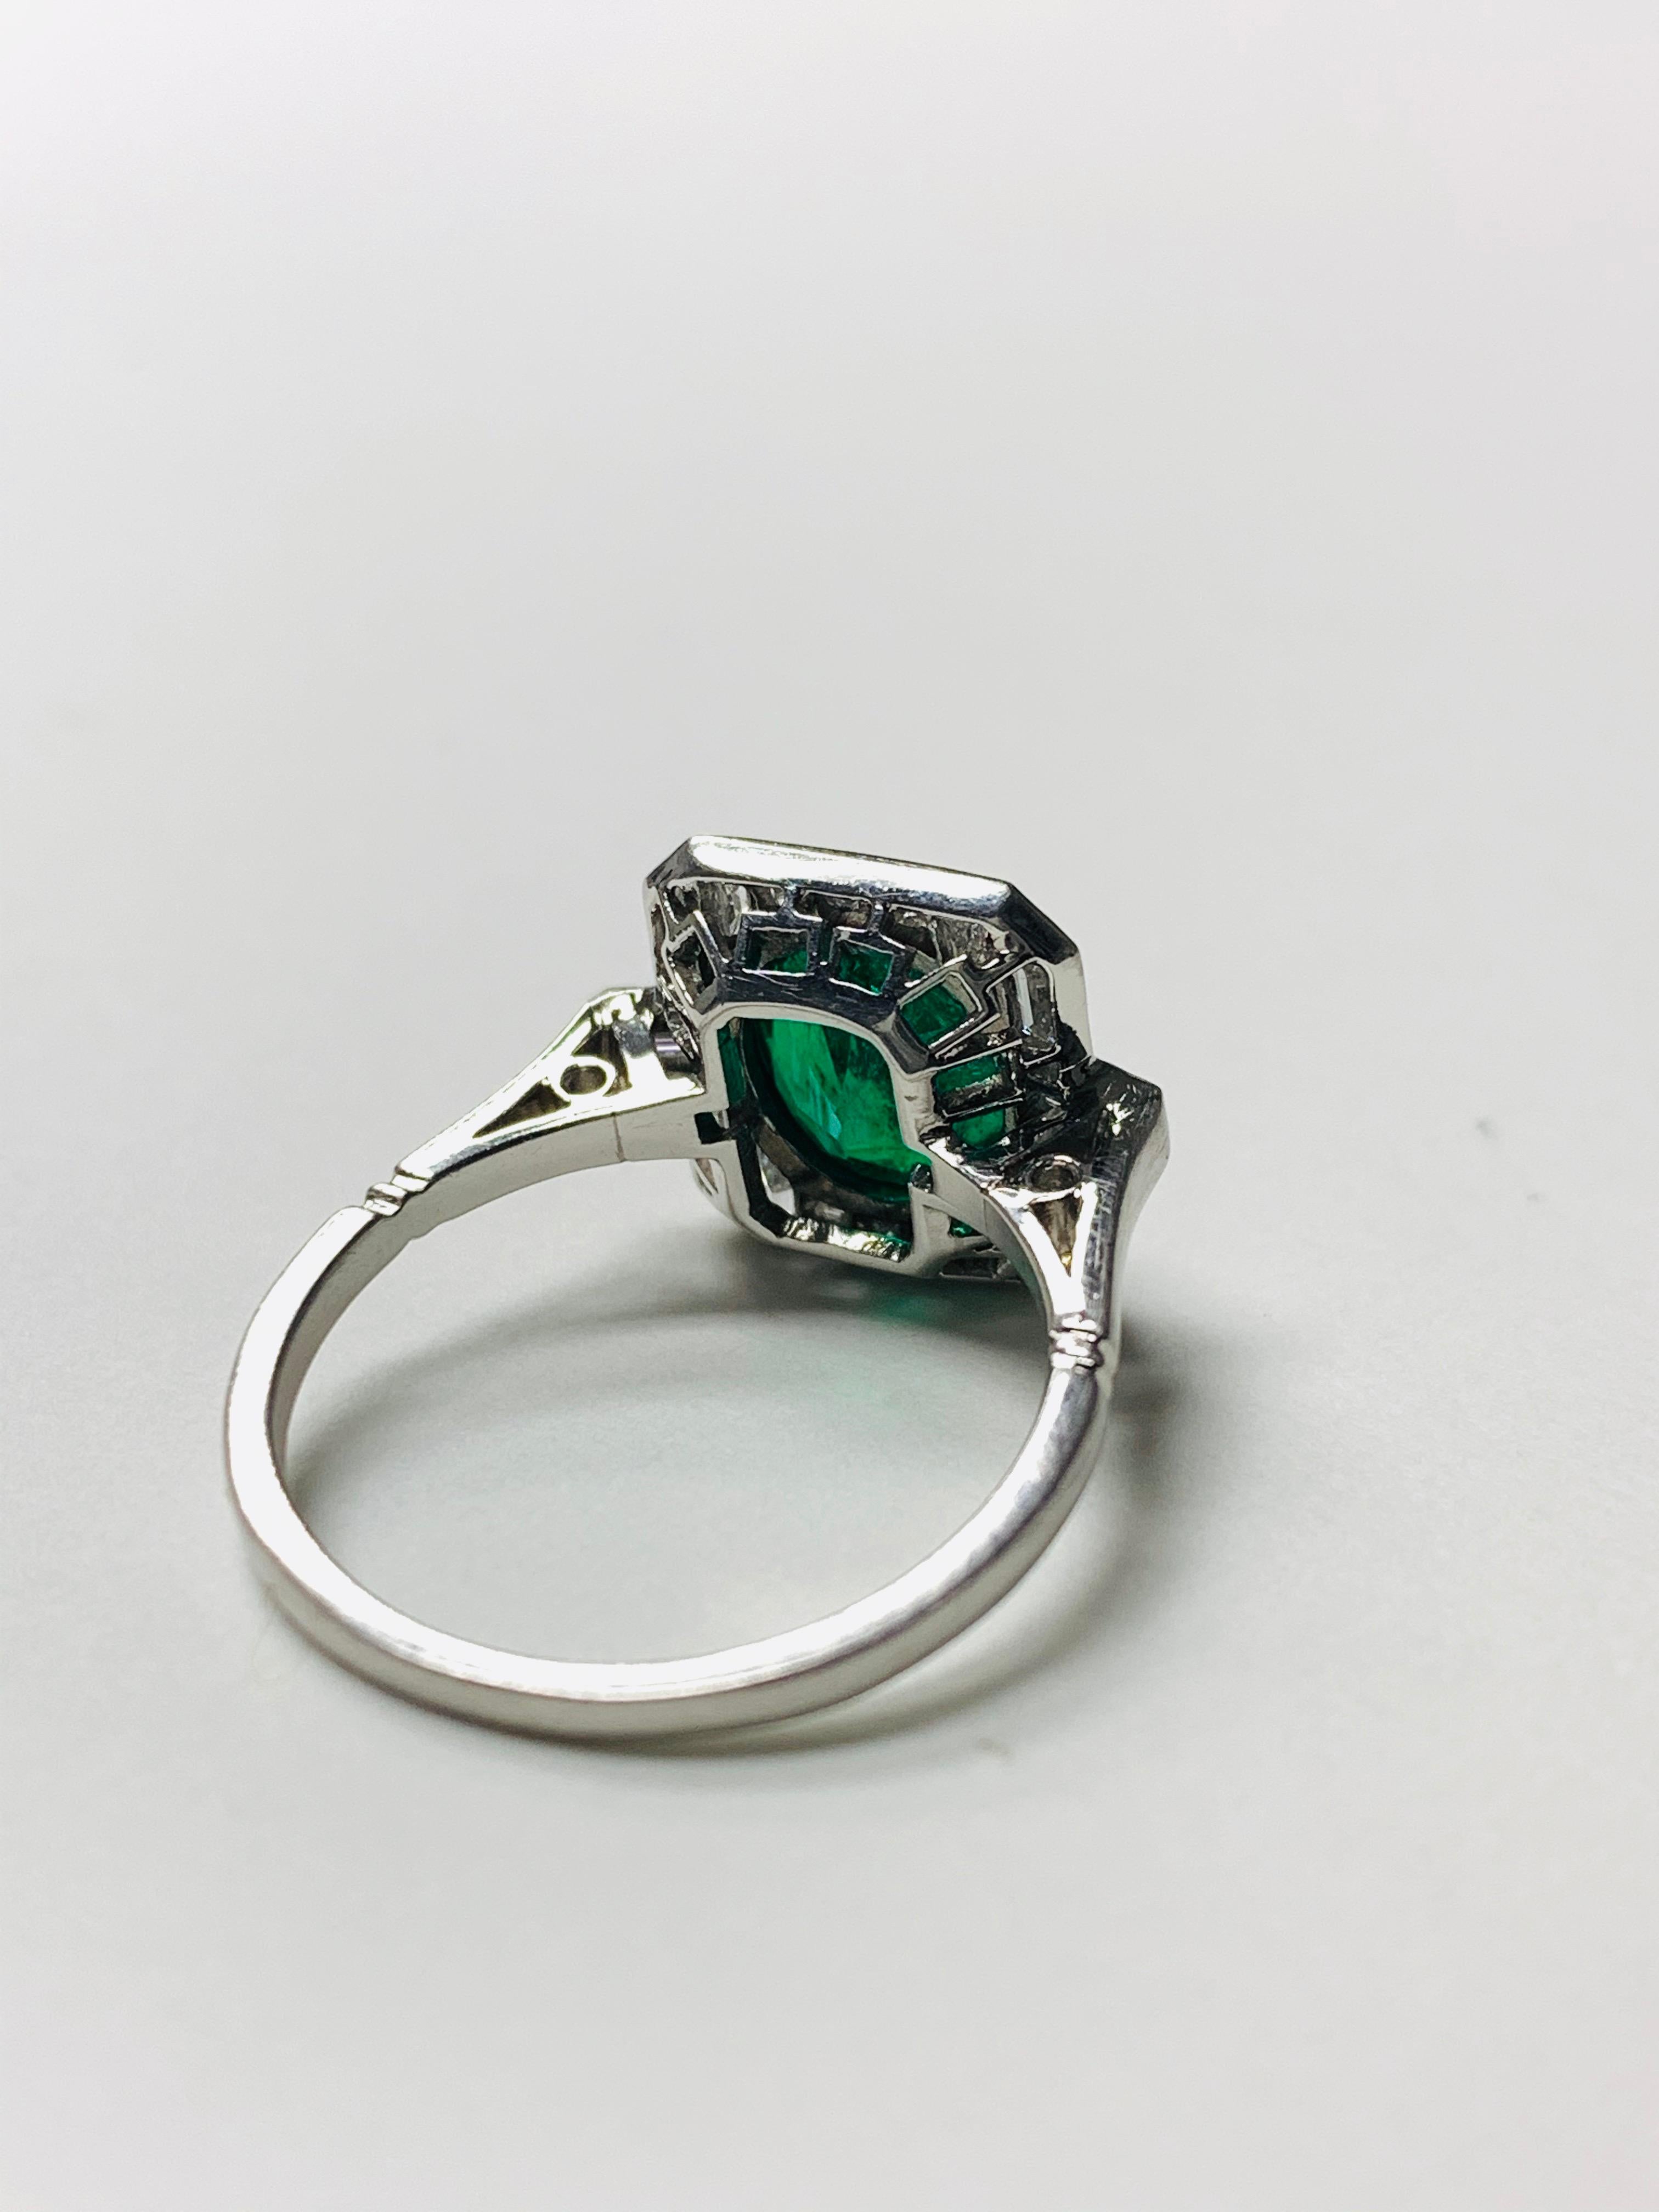 Women's Emerald and Baguette Diamond Engagement Ring in Platinum